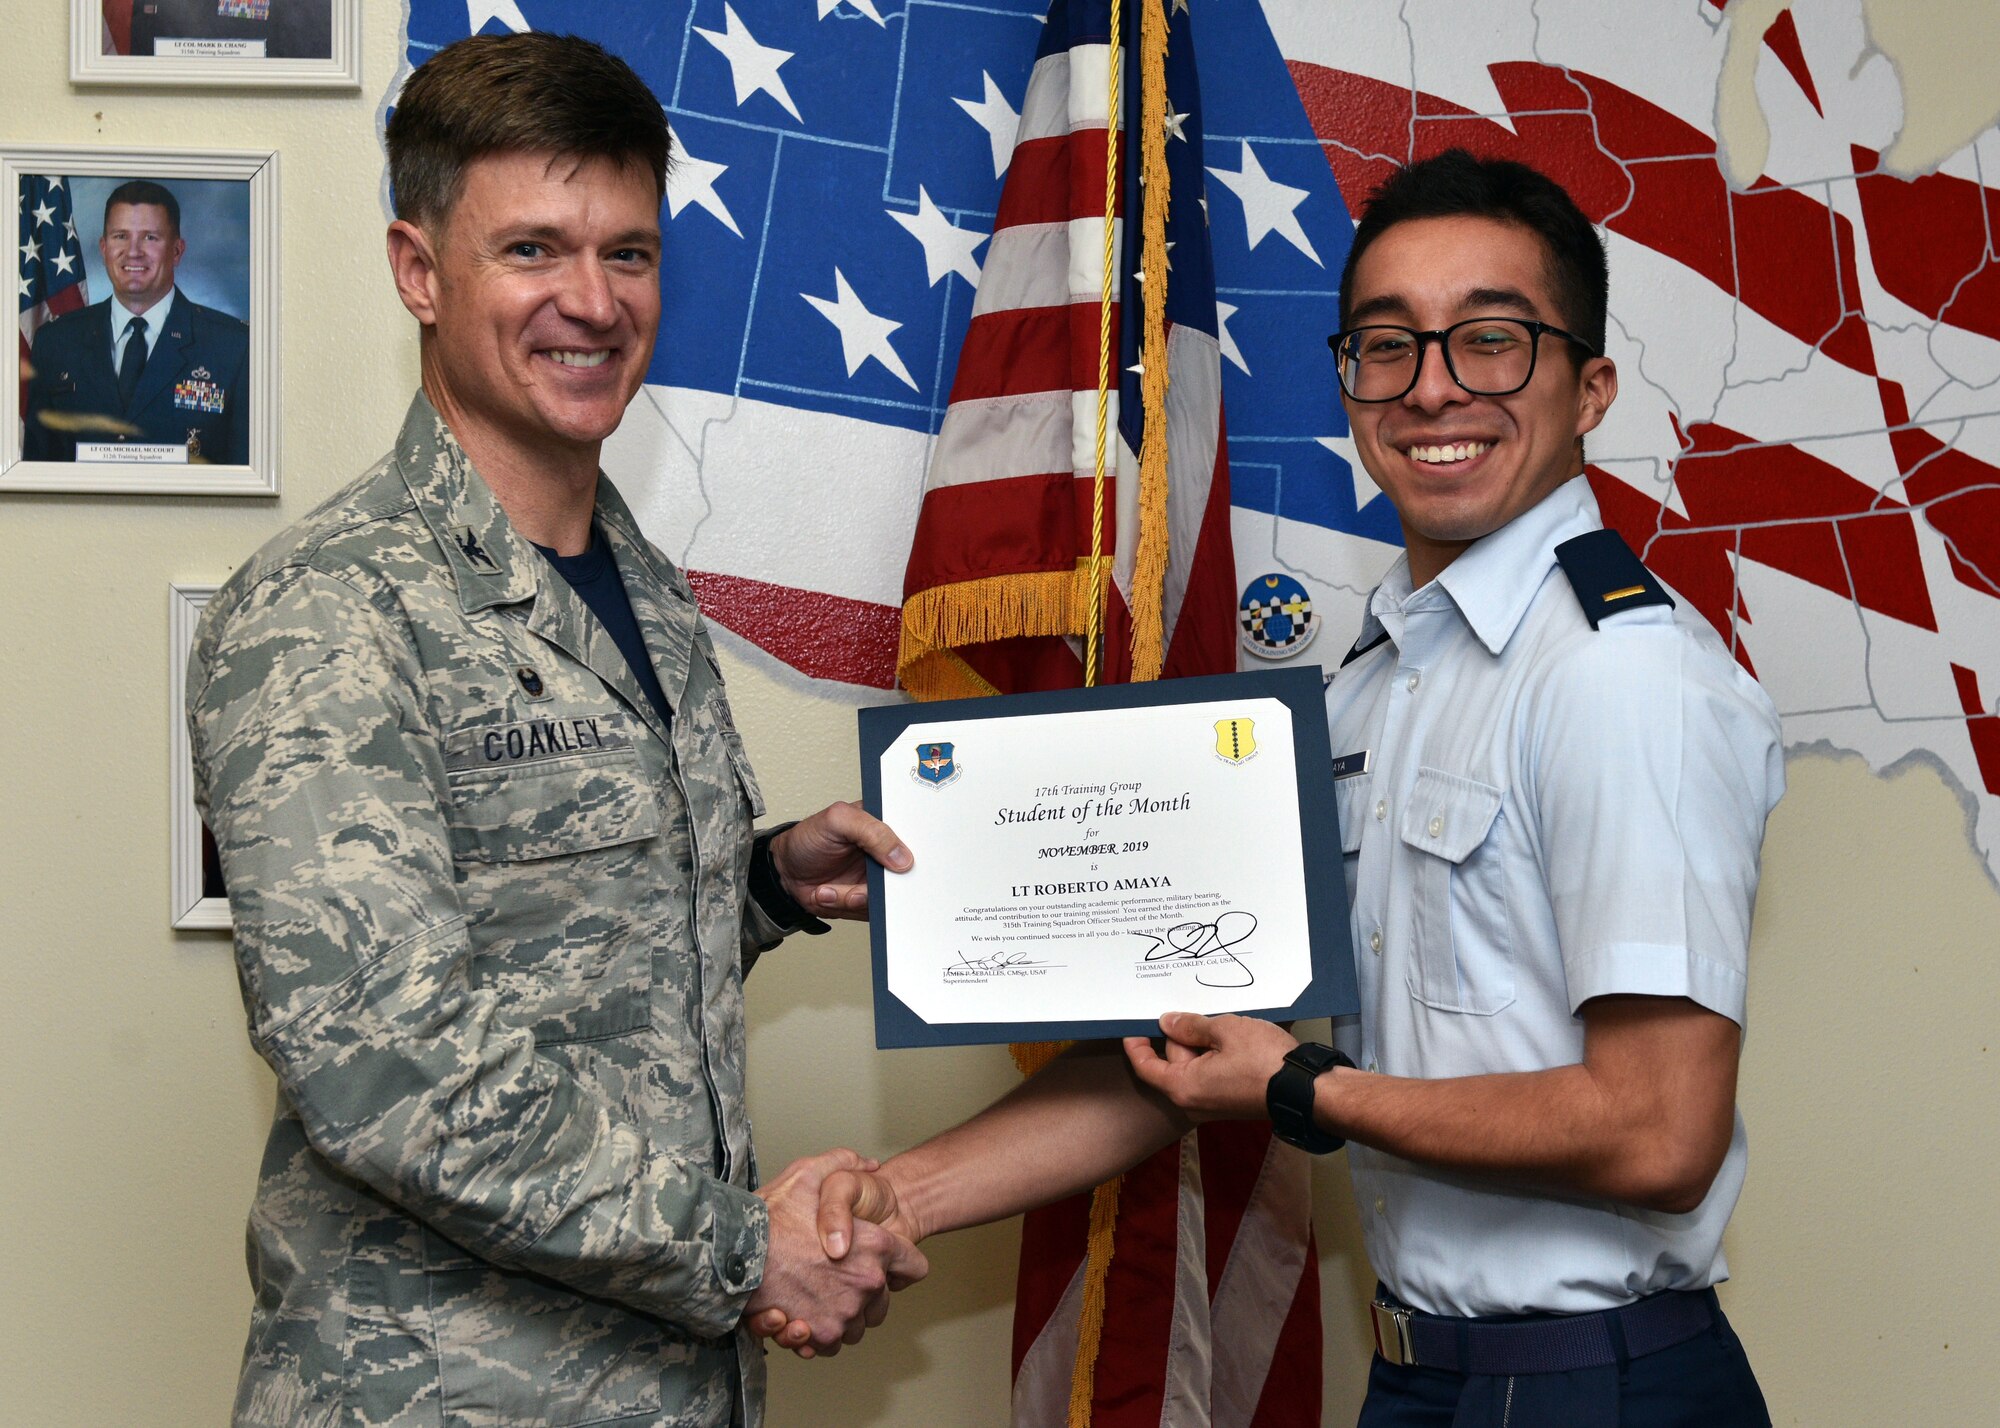 U.S. Air Force Col. Thomas Coakley, 17th Training Group commander, presents the 315th Training Squadron Officer Student of the Month award to 2nd Lt. Roberto Amaya, 315th TRS student, at Brandenburg Hall on Goodfellow Air Force Base, Texas, Dec. 6, 2019. The 315th TRS’s vision is to develop combat-ready intelligence, surveillance and reconnaissance professionals and promote an innovative squadron culture and identity unmatched across the U.S. Air Force. (U.S. Air Force photo by Airman 1st Class Robyn Hunsinger/Released)